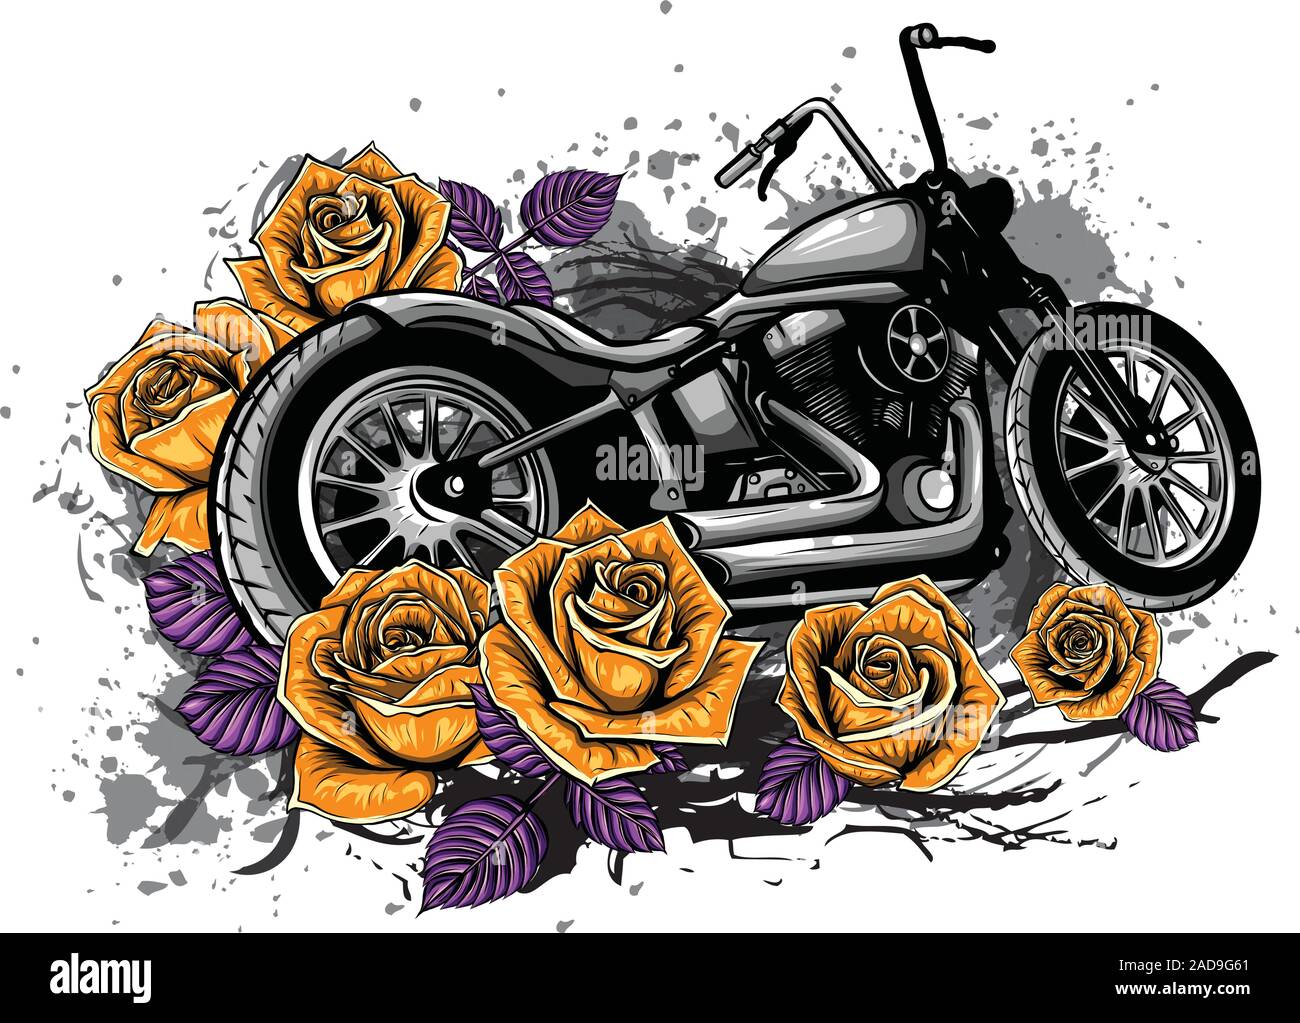 vector illustation vintage chopper motorcycle and roses poster Stock Vector